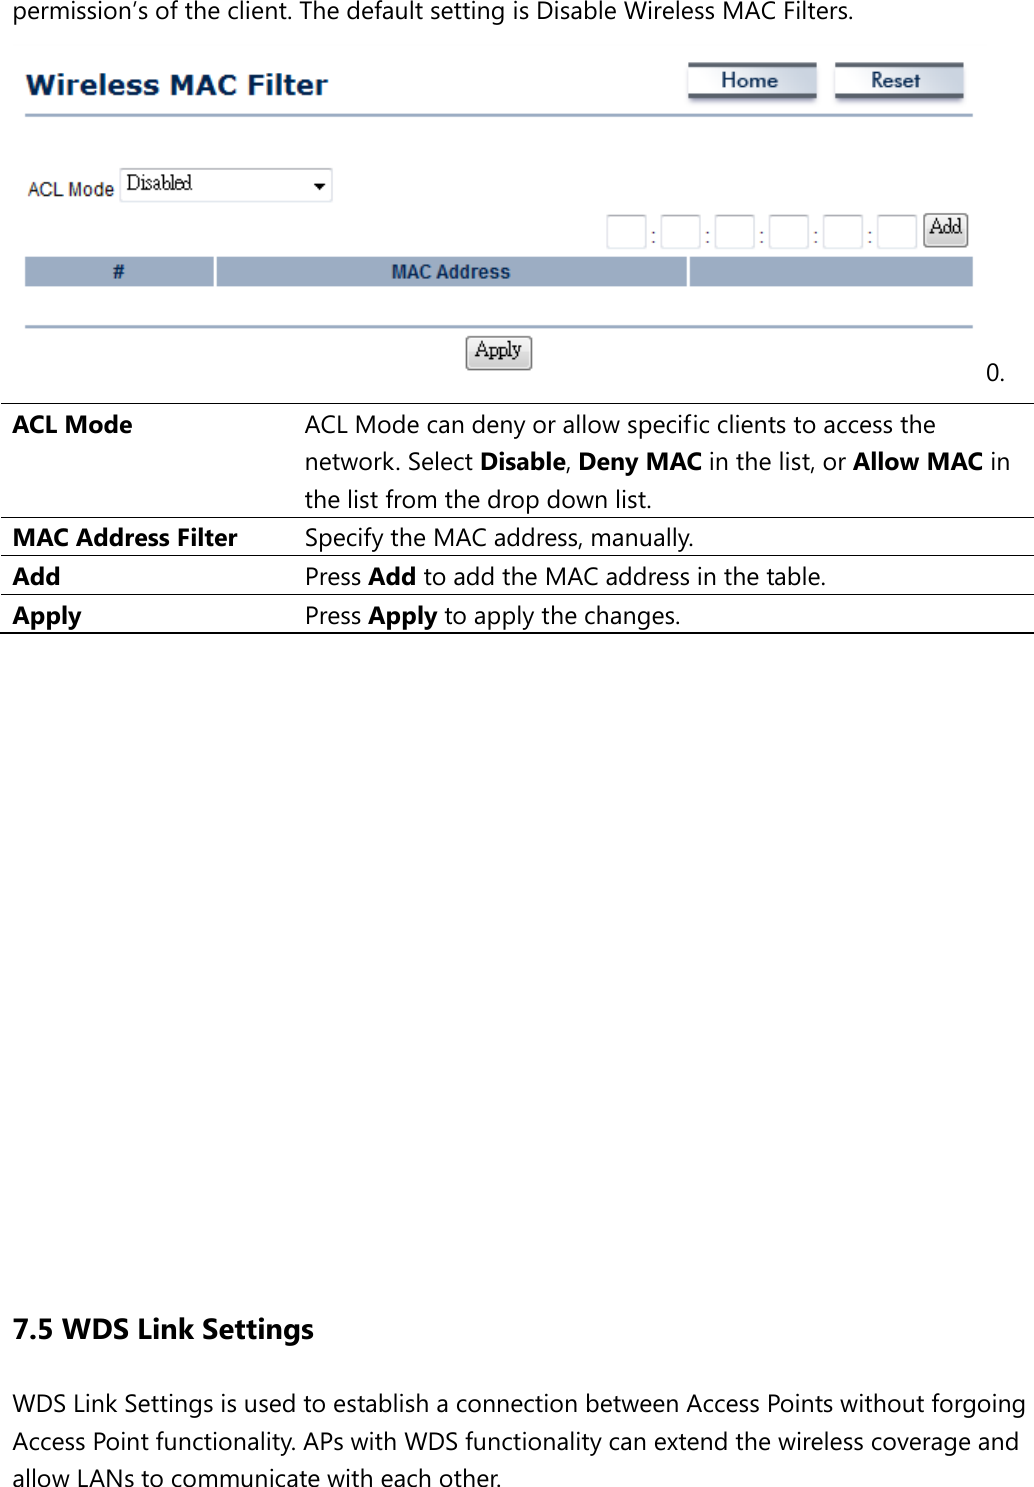 permission’s of the client. The default setting is Disable Wireless MAC Filters. 0. ACL Mode ACL Mode can deny or allow specific clients to access the network. Select Disable, Deny MAC in the list, or Allow MAC in the list from the drop down list. MAC Address Filter Specify the MAC address, manually. Add Press Add to add the MAC address in the table. Apply Press Apply to apply the changes.                  7.5 WDS Link Settings WDS Link Settings is used to establish a connection between Access Points without forgoing Access Point functionality. APs with WDS functionality can extend the wireless coverage and allow LANs to communicate with each other. 